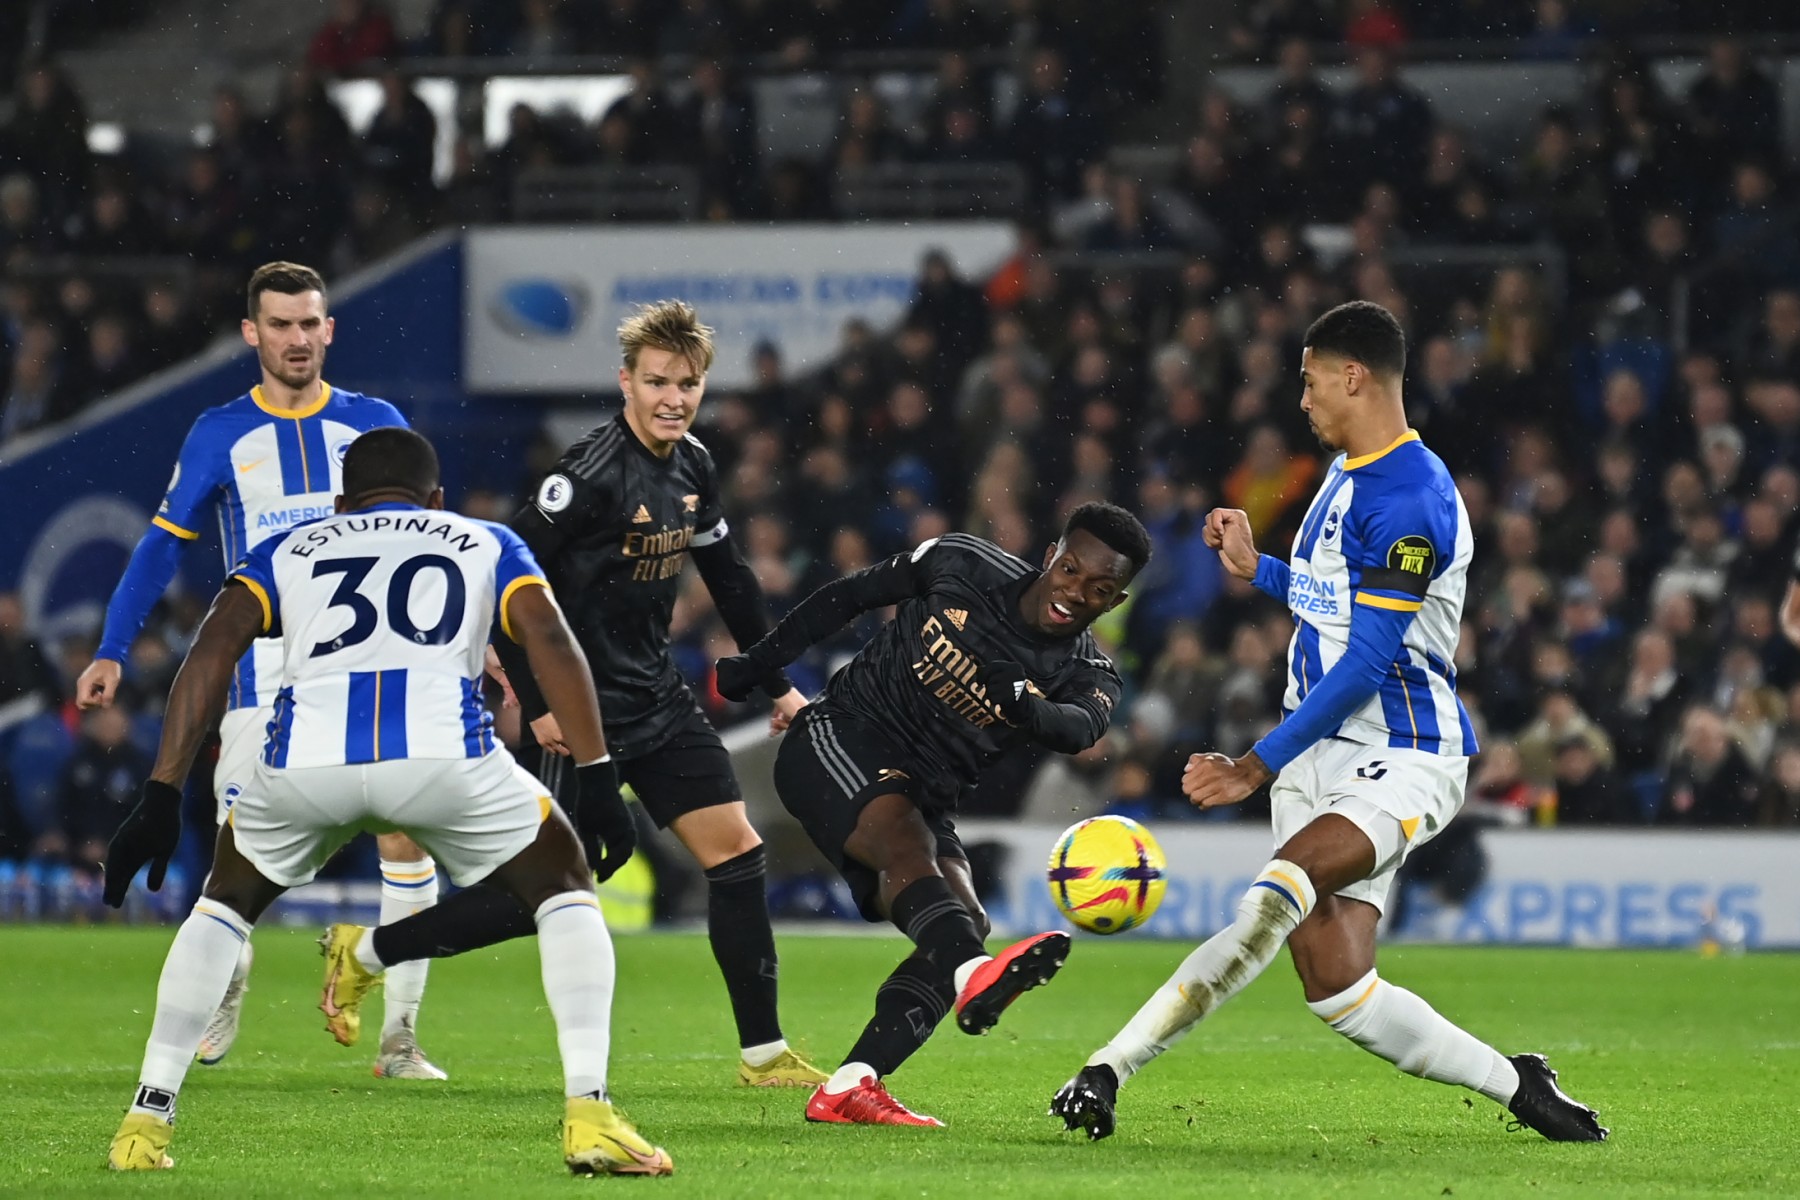 Arsenal's English striker Eddie Nketiah (C) has an unsuccessful shot during the English Premier League football match between Brighton and Hove Albion and Arsenal at the American Express Community Stadium in Brighton, southern England on December 31, 2022. (Photo by Glyn KIRK / AFP)